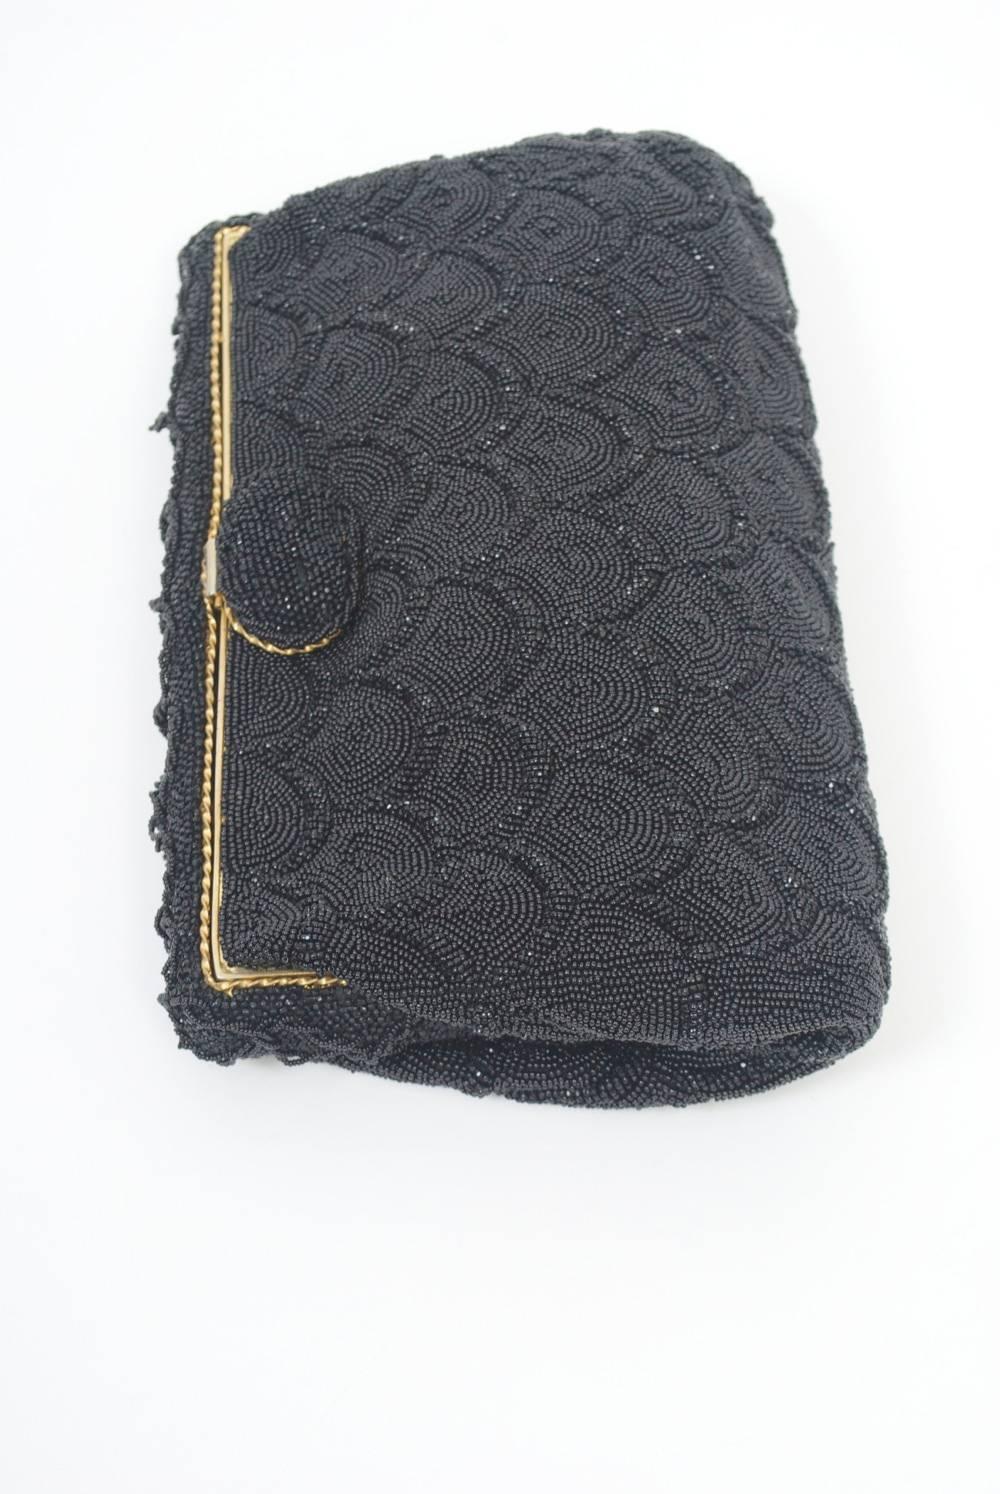 Vintage Black Beaded Clutch In Excellent Condition For Sale In Alford, MA